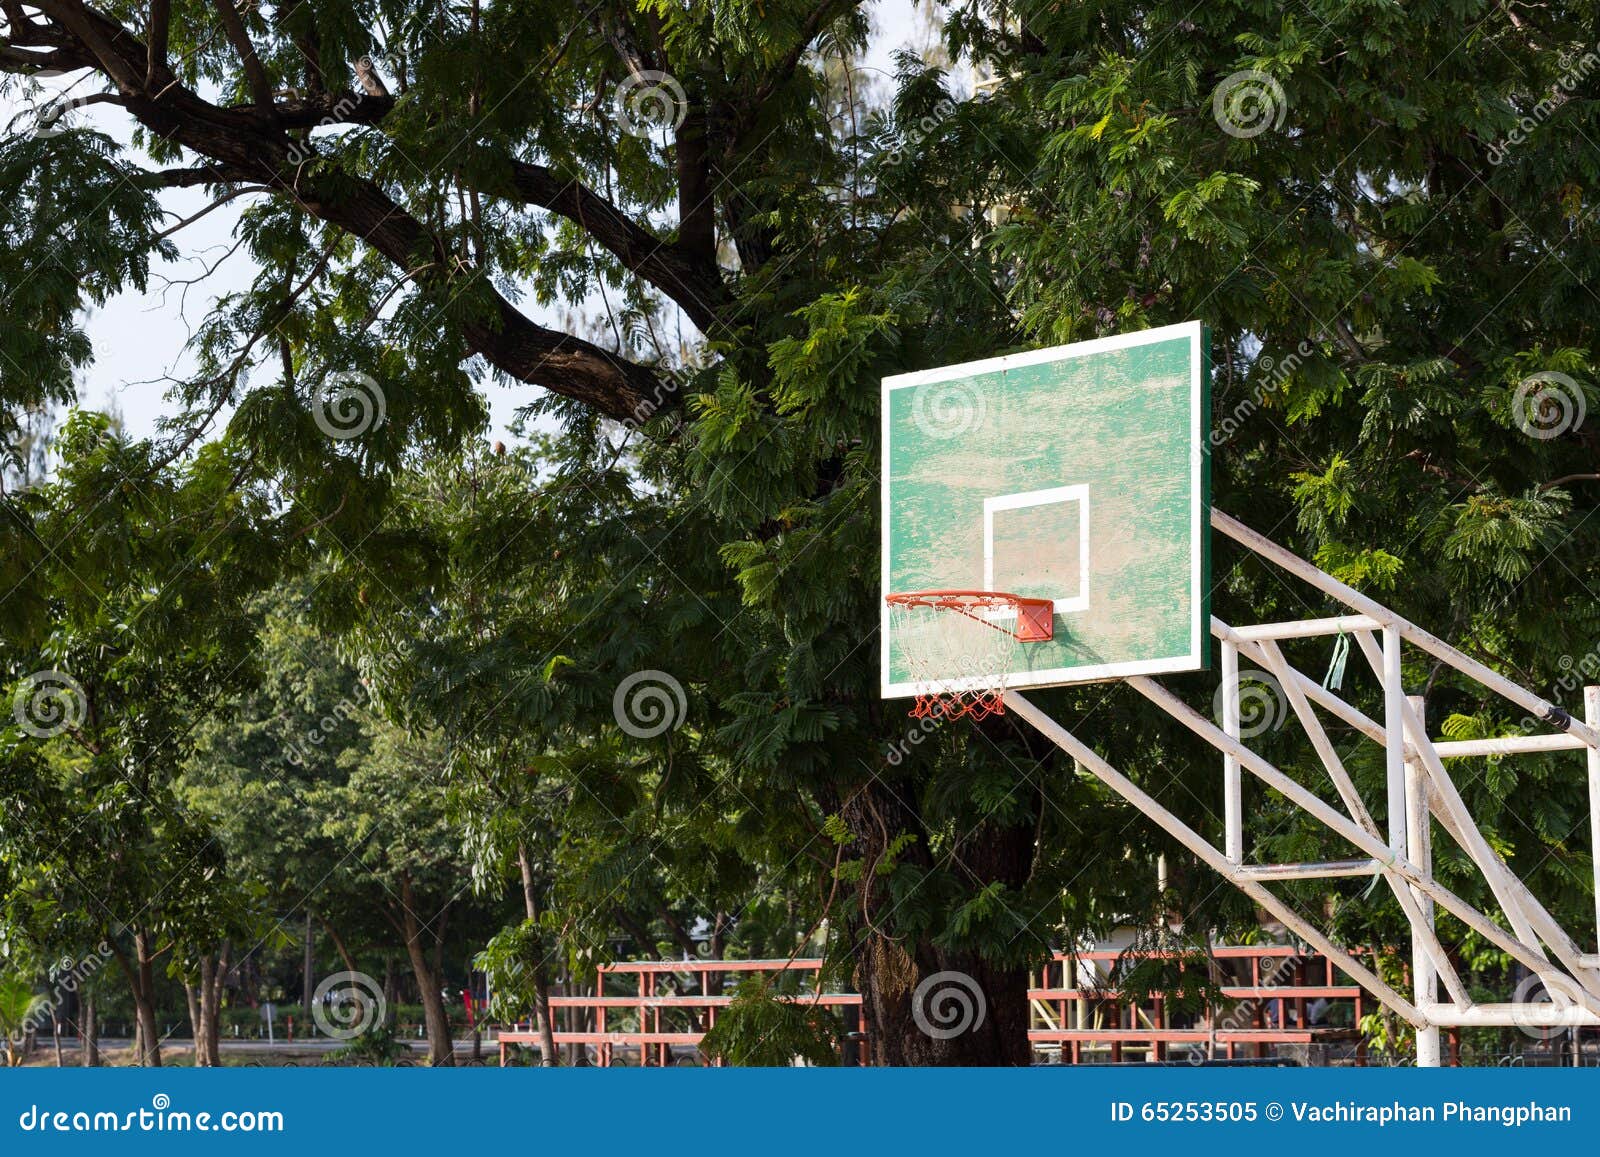 Basketball Hoop In The Park Stock Image - Image of playground, ground